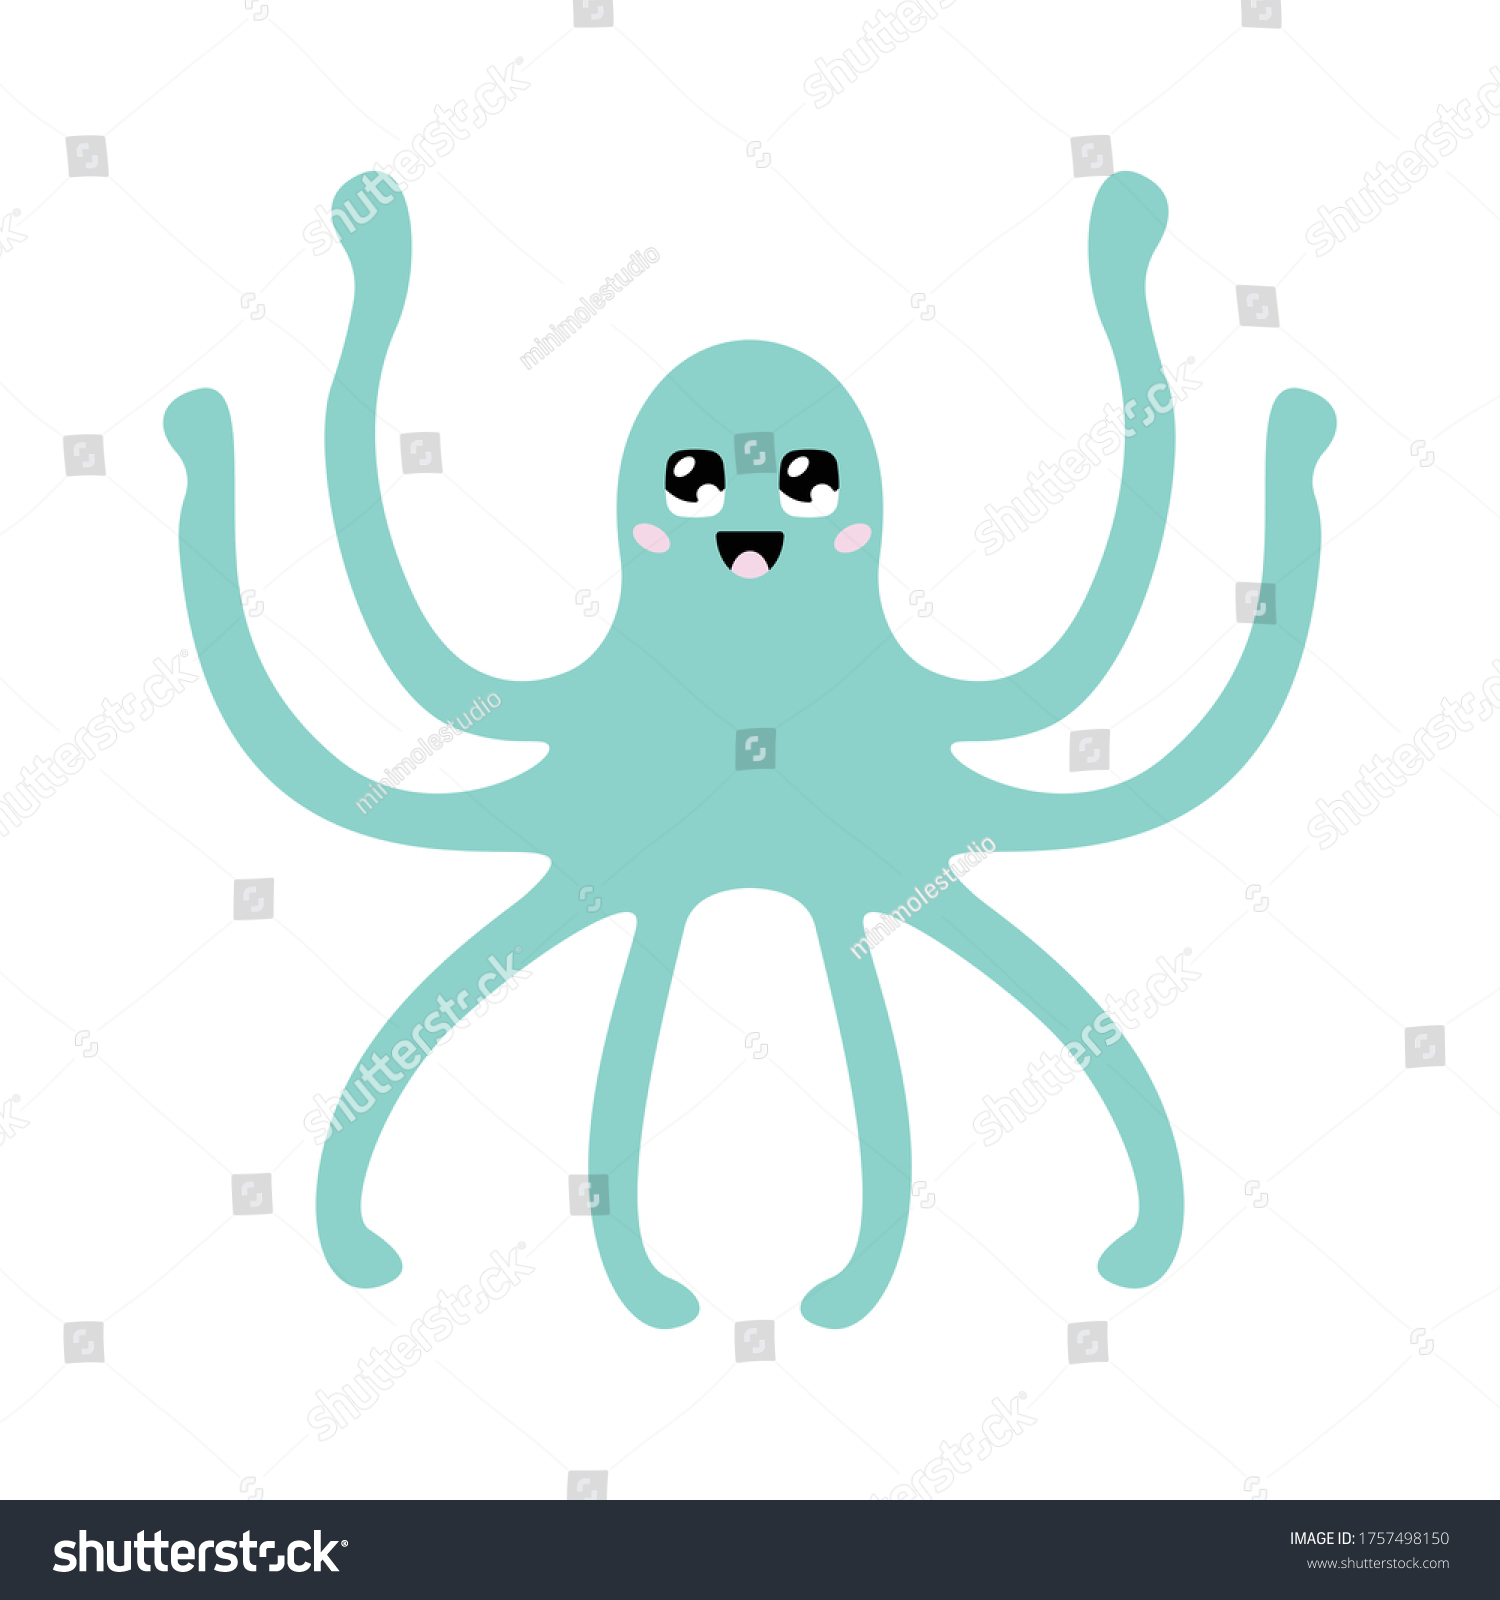 SVG of Vector illustration of an octopus with a cute face. Simple, flat kawaii style. svg